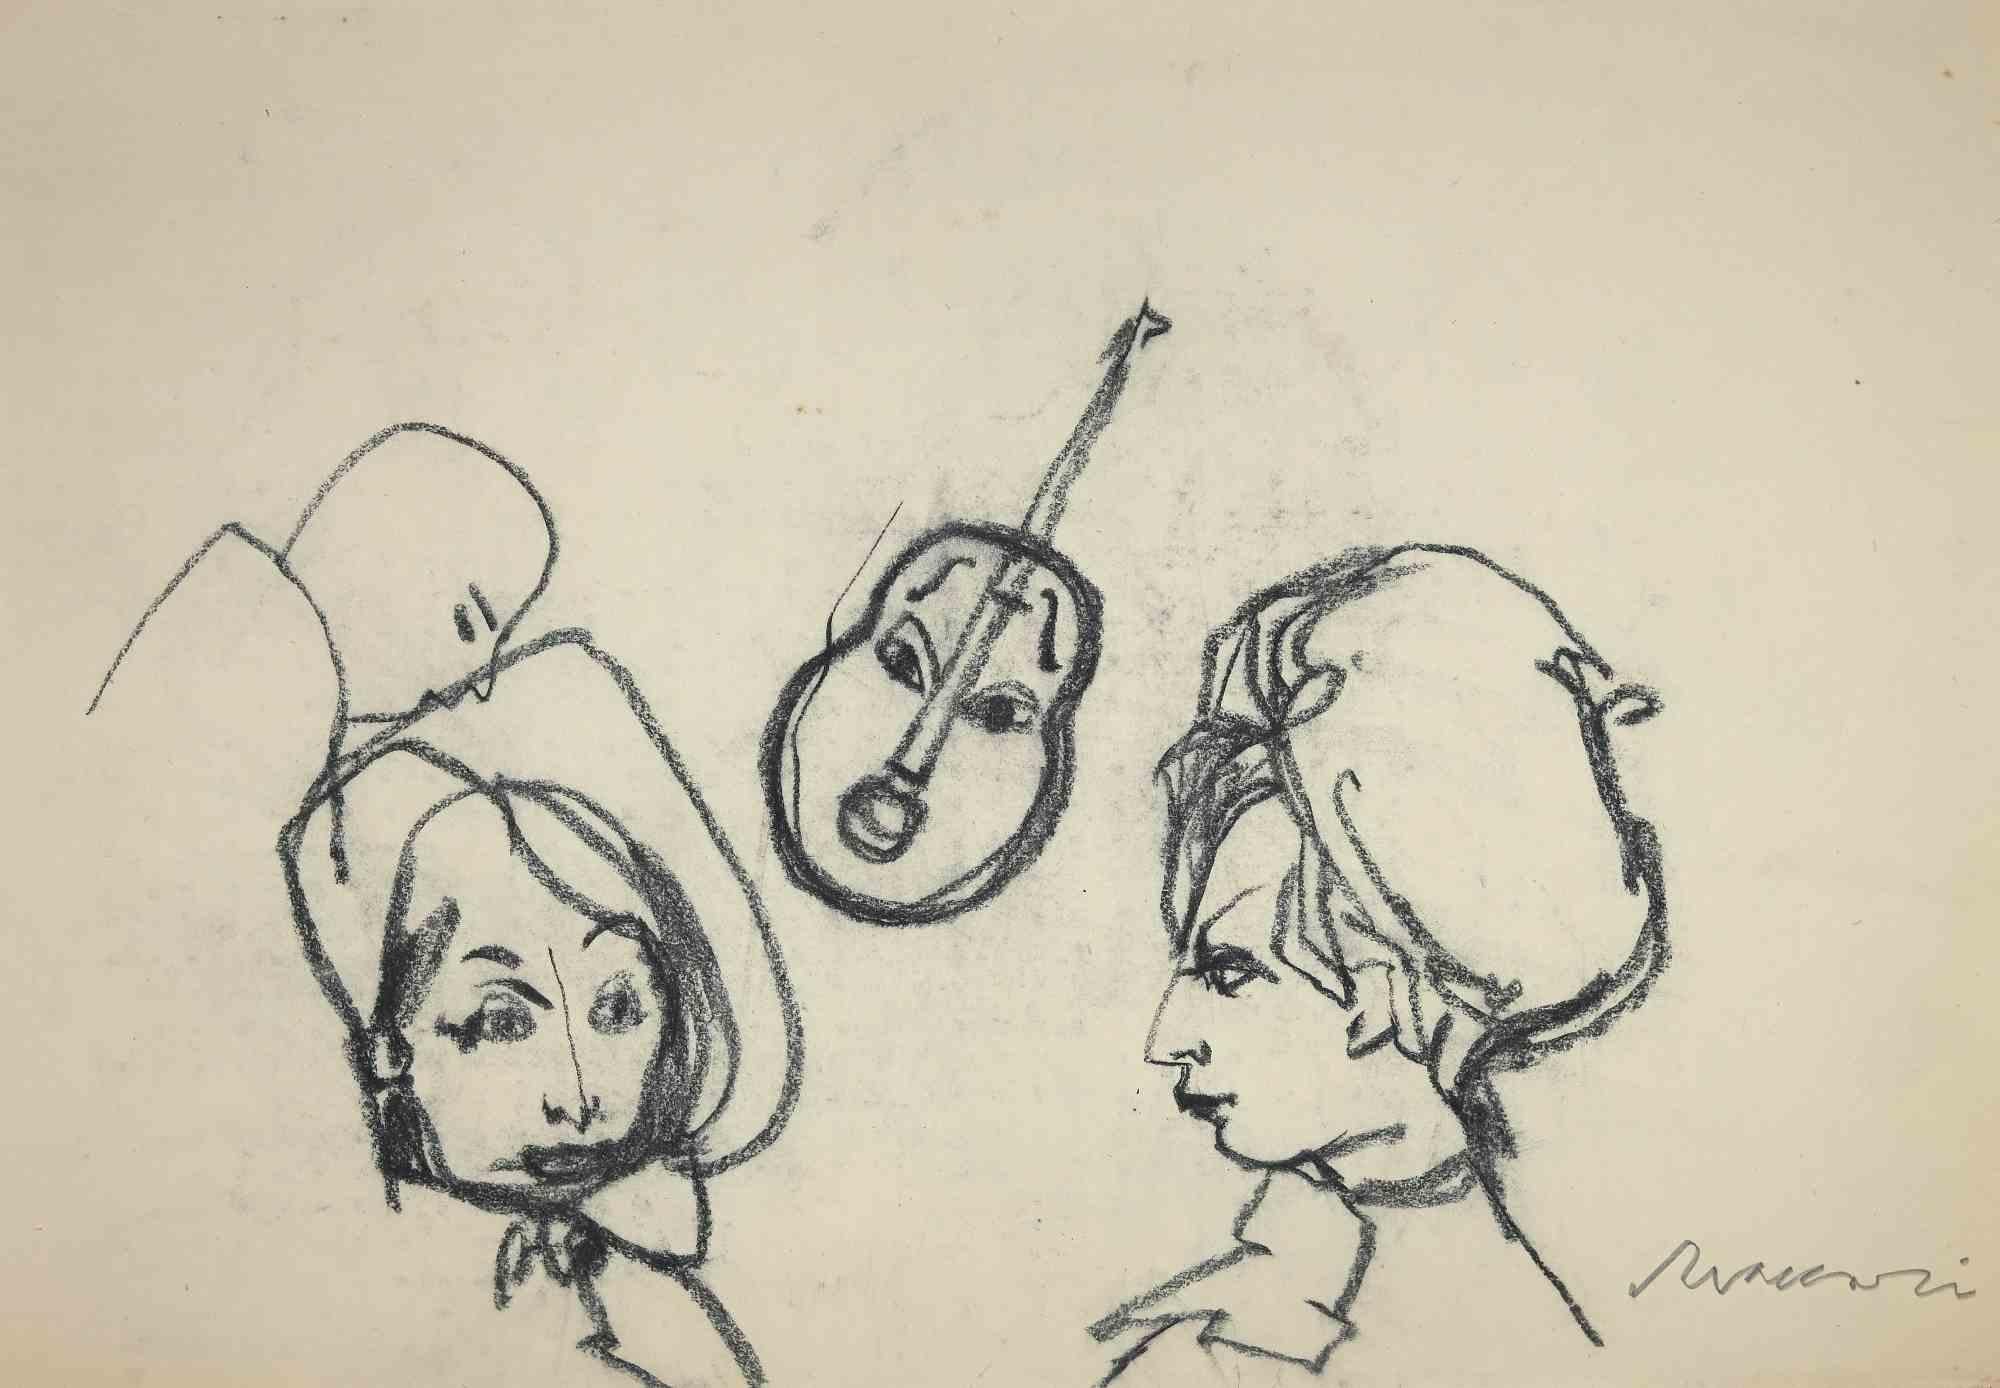 The Faces - Drawing by Mino Maccari - Mid-20th Century